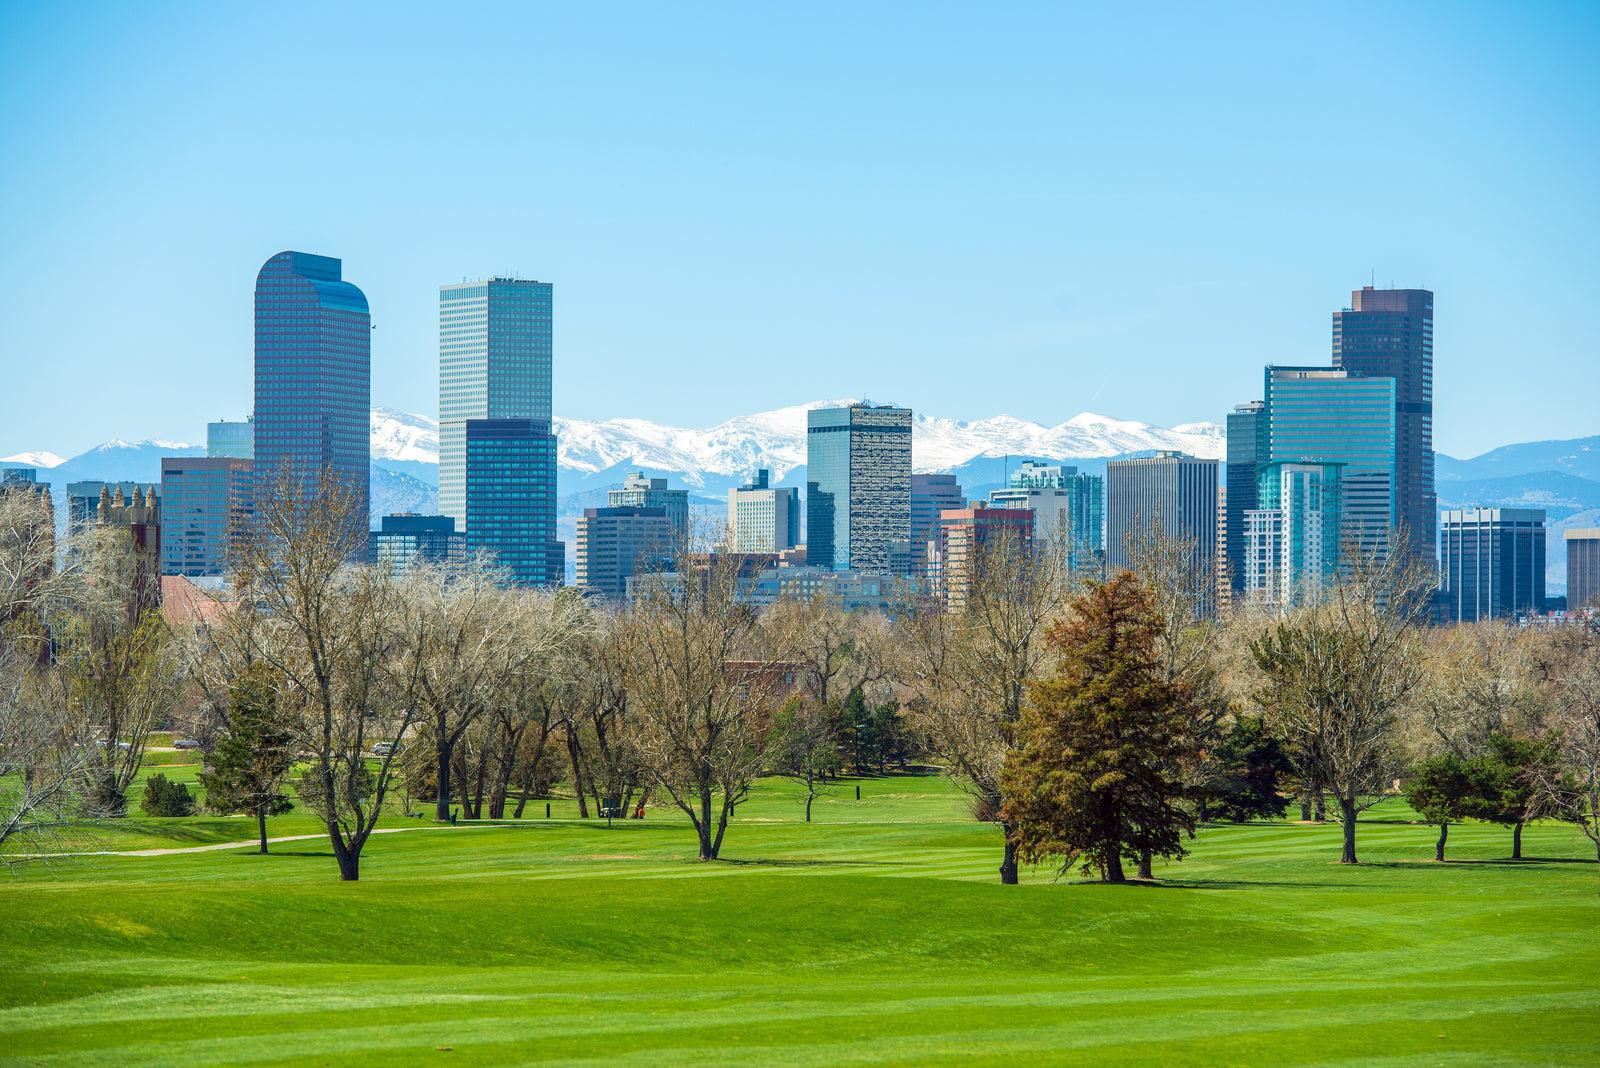 A green grassy field with a city skyline in the background near Boulder Longevity Institute.